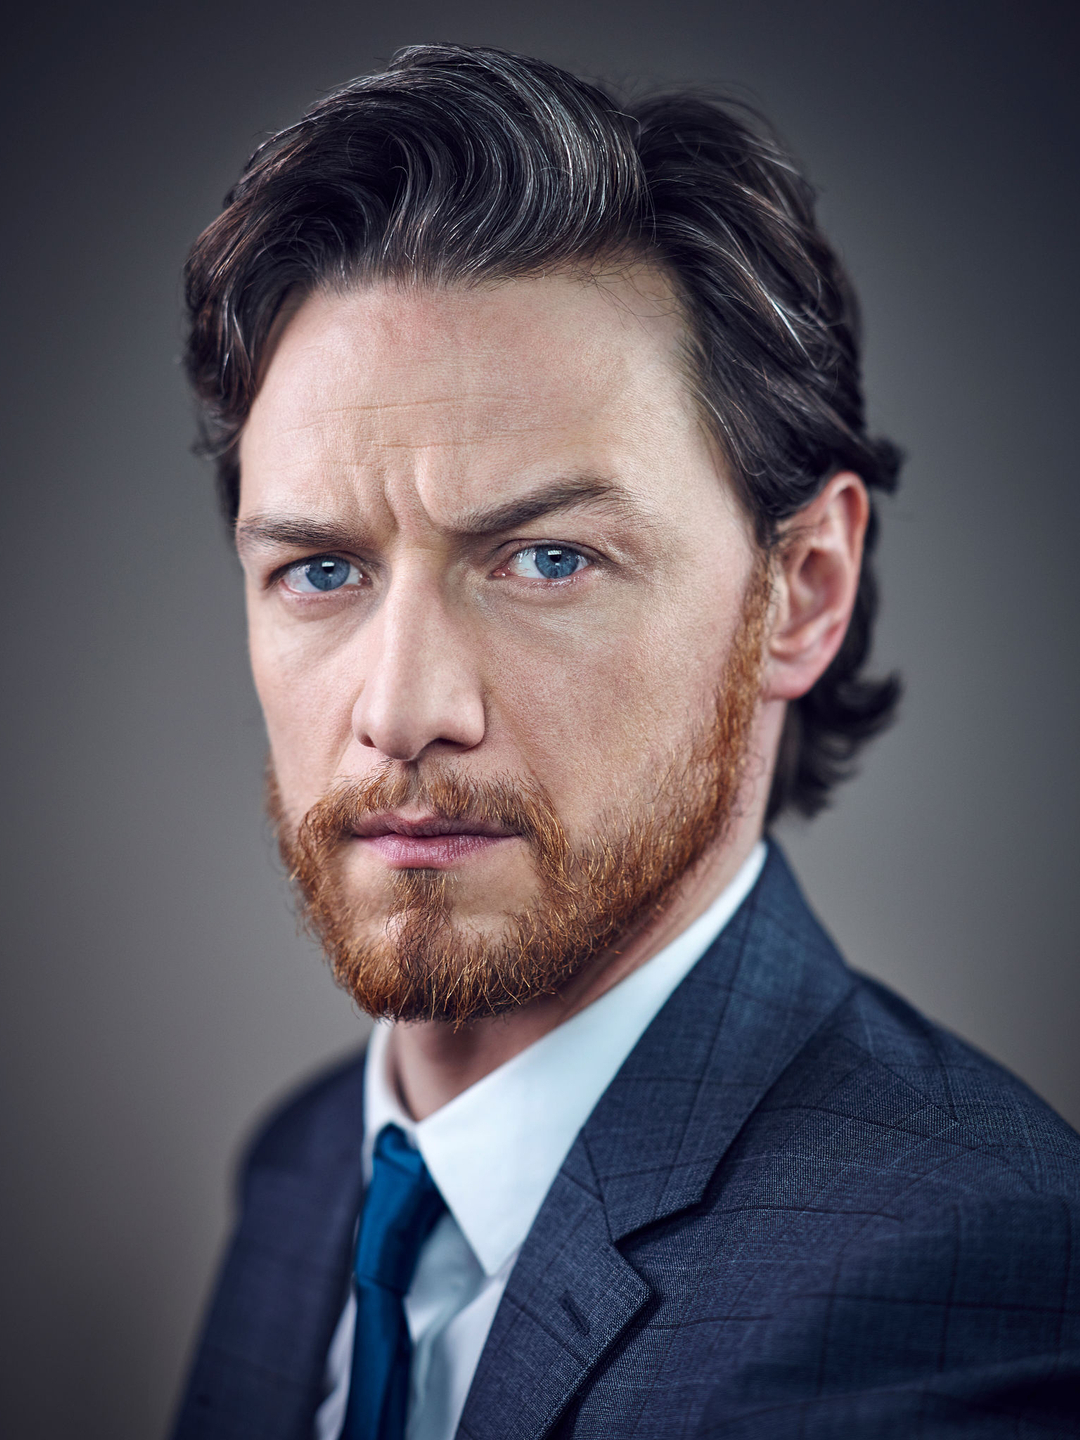 James McAvoy interesting facts